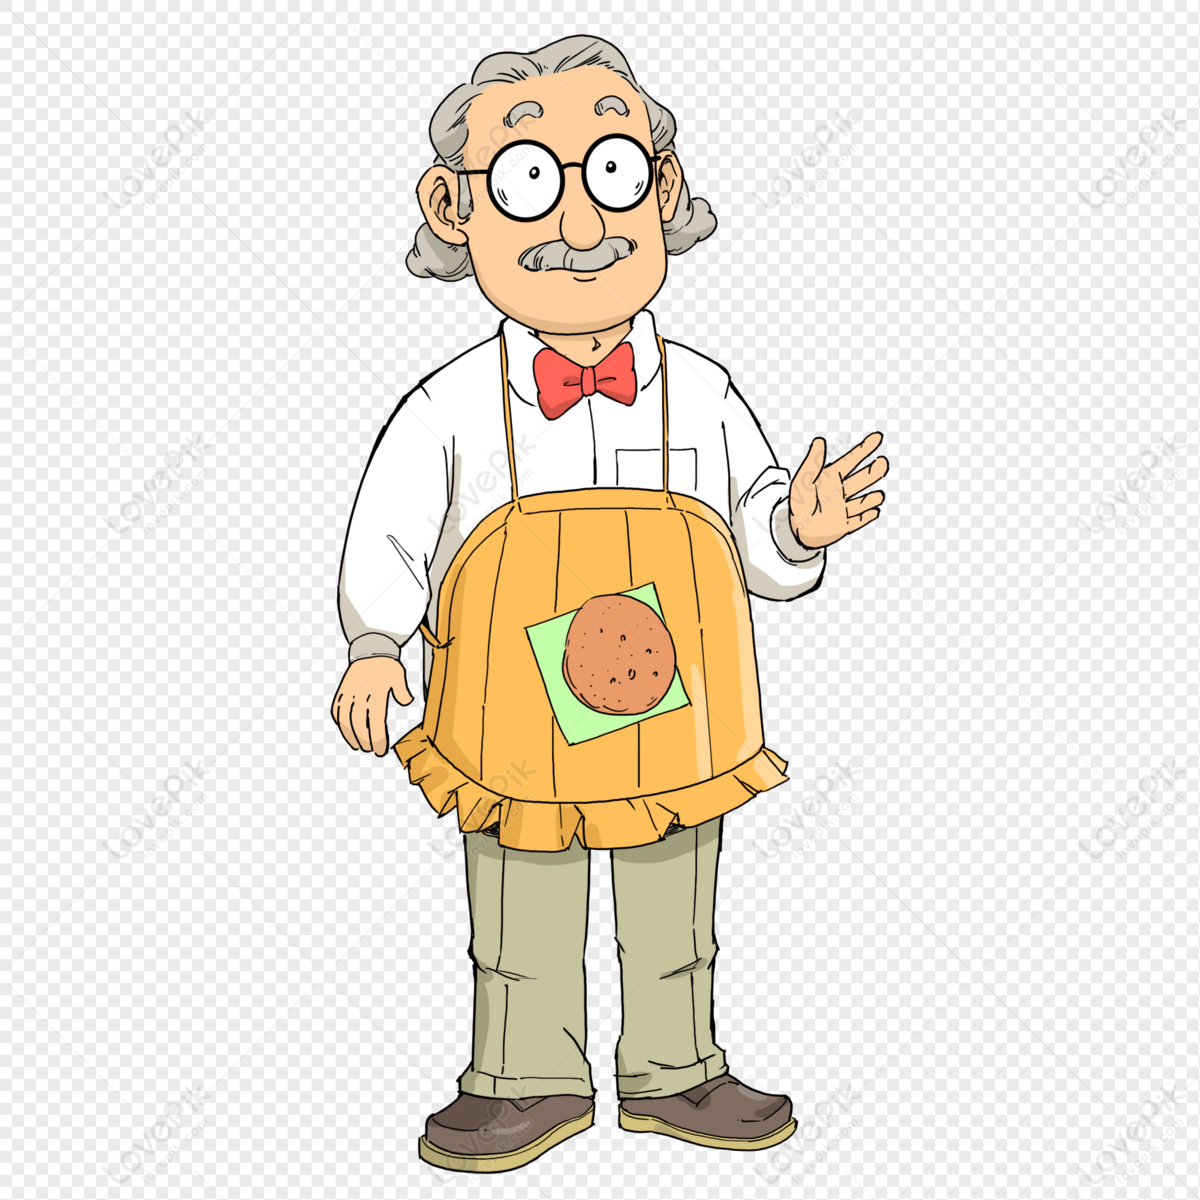 Cartoon Grandfather PNG Transparent Background And Clipart Image For Free  Download - Lovepik | 401433430